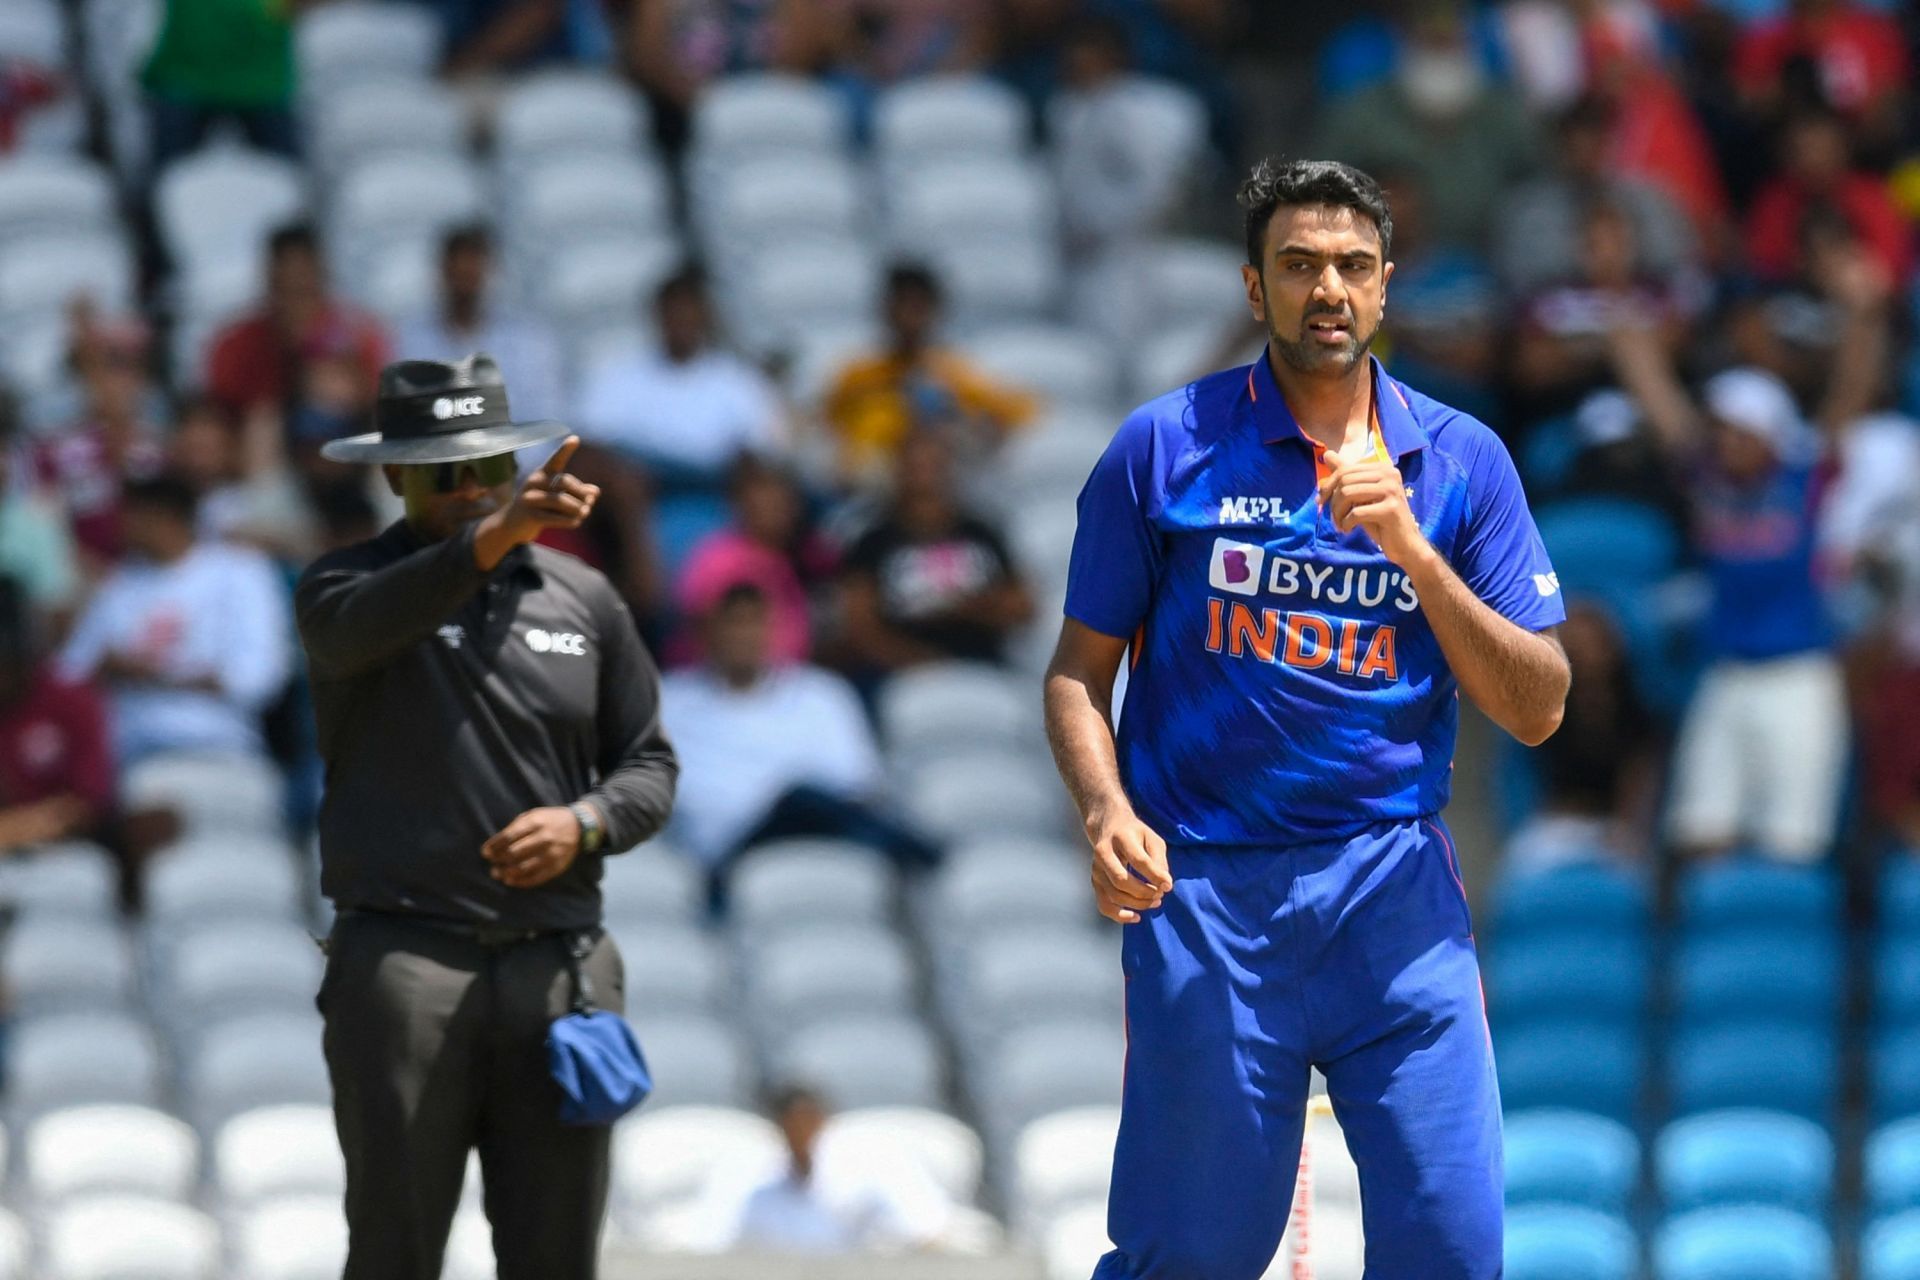 R Ashwin scalped two wickets in the first T20I against the West Indies [P/C: BCCI/Twitter]